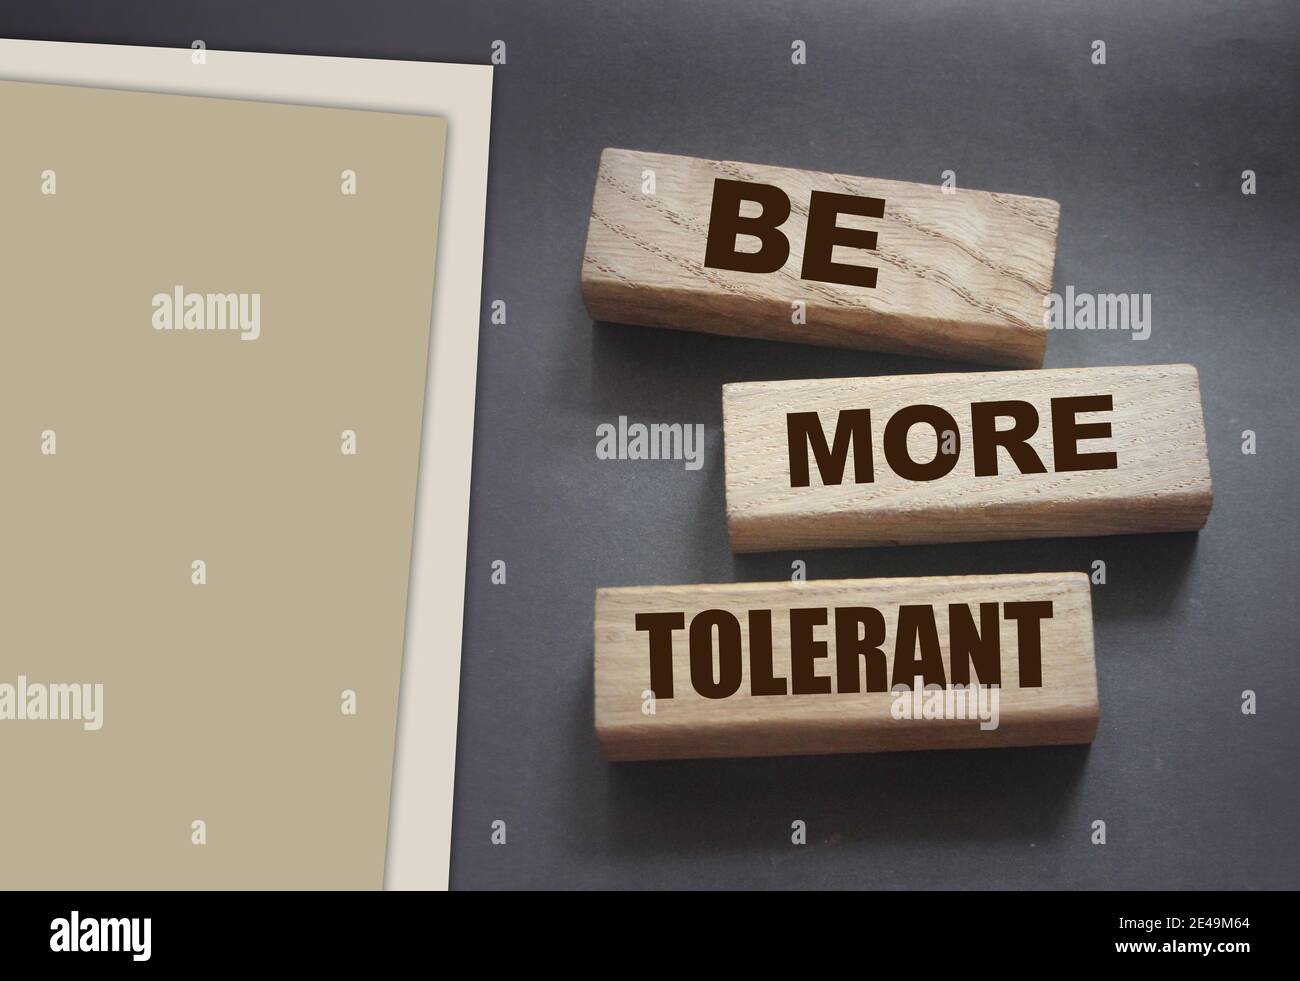 Be More Tolerant words on wooden blocks on dark background. Tolerance Equality diversity social concept. Stock Photo